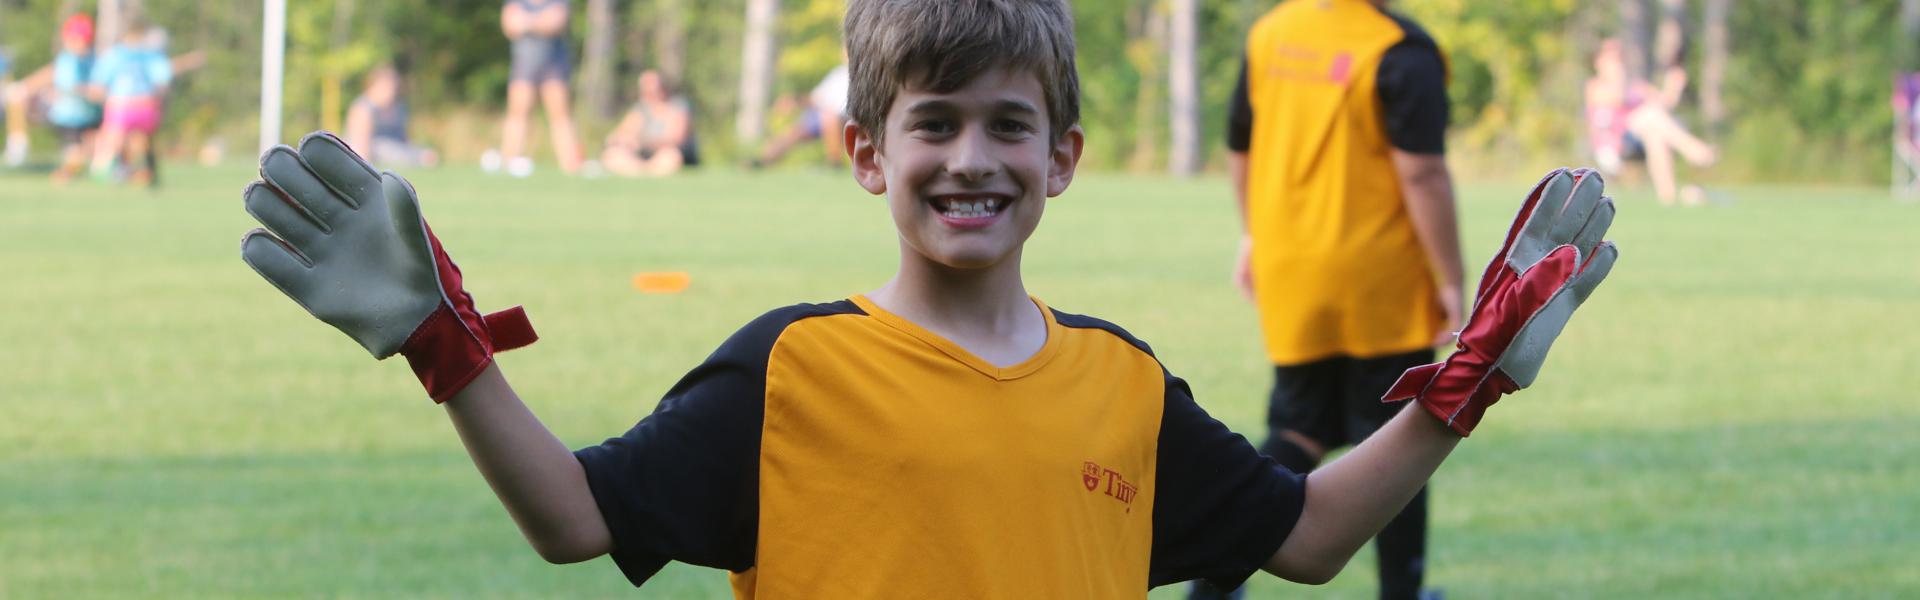 Youth soccer player smiling and waving hands